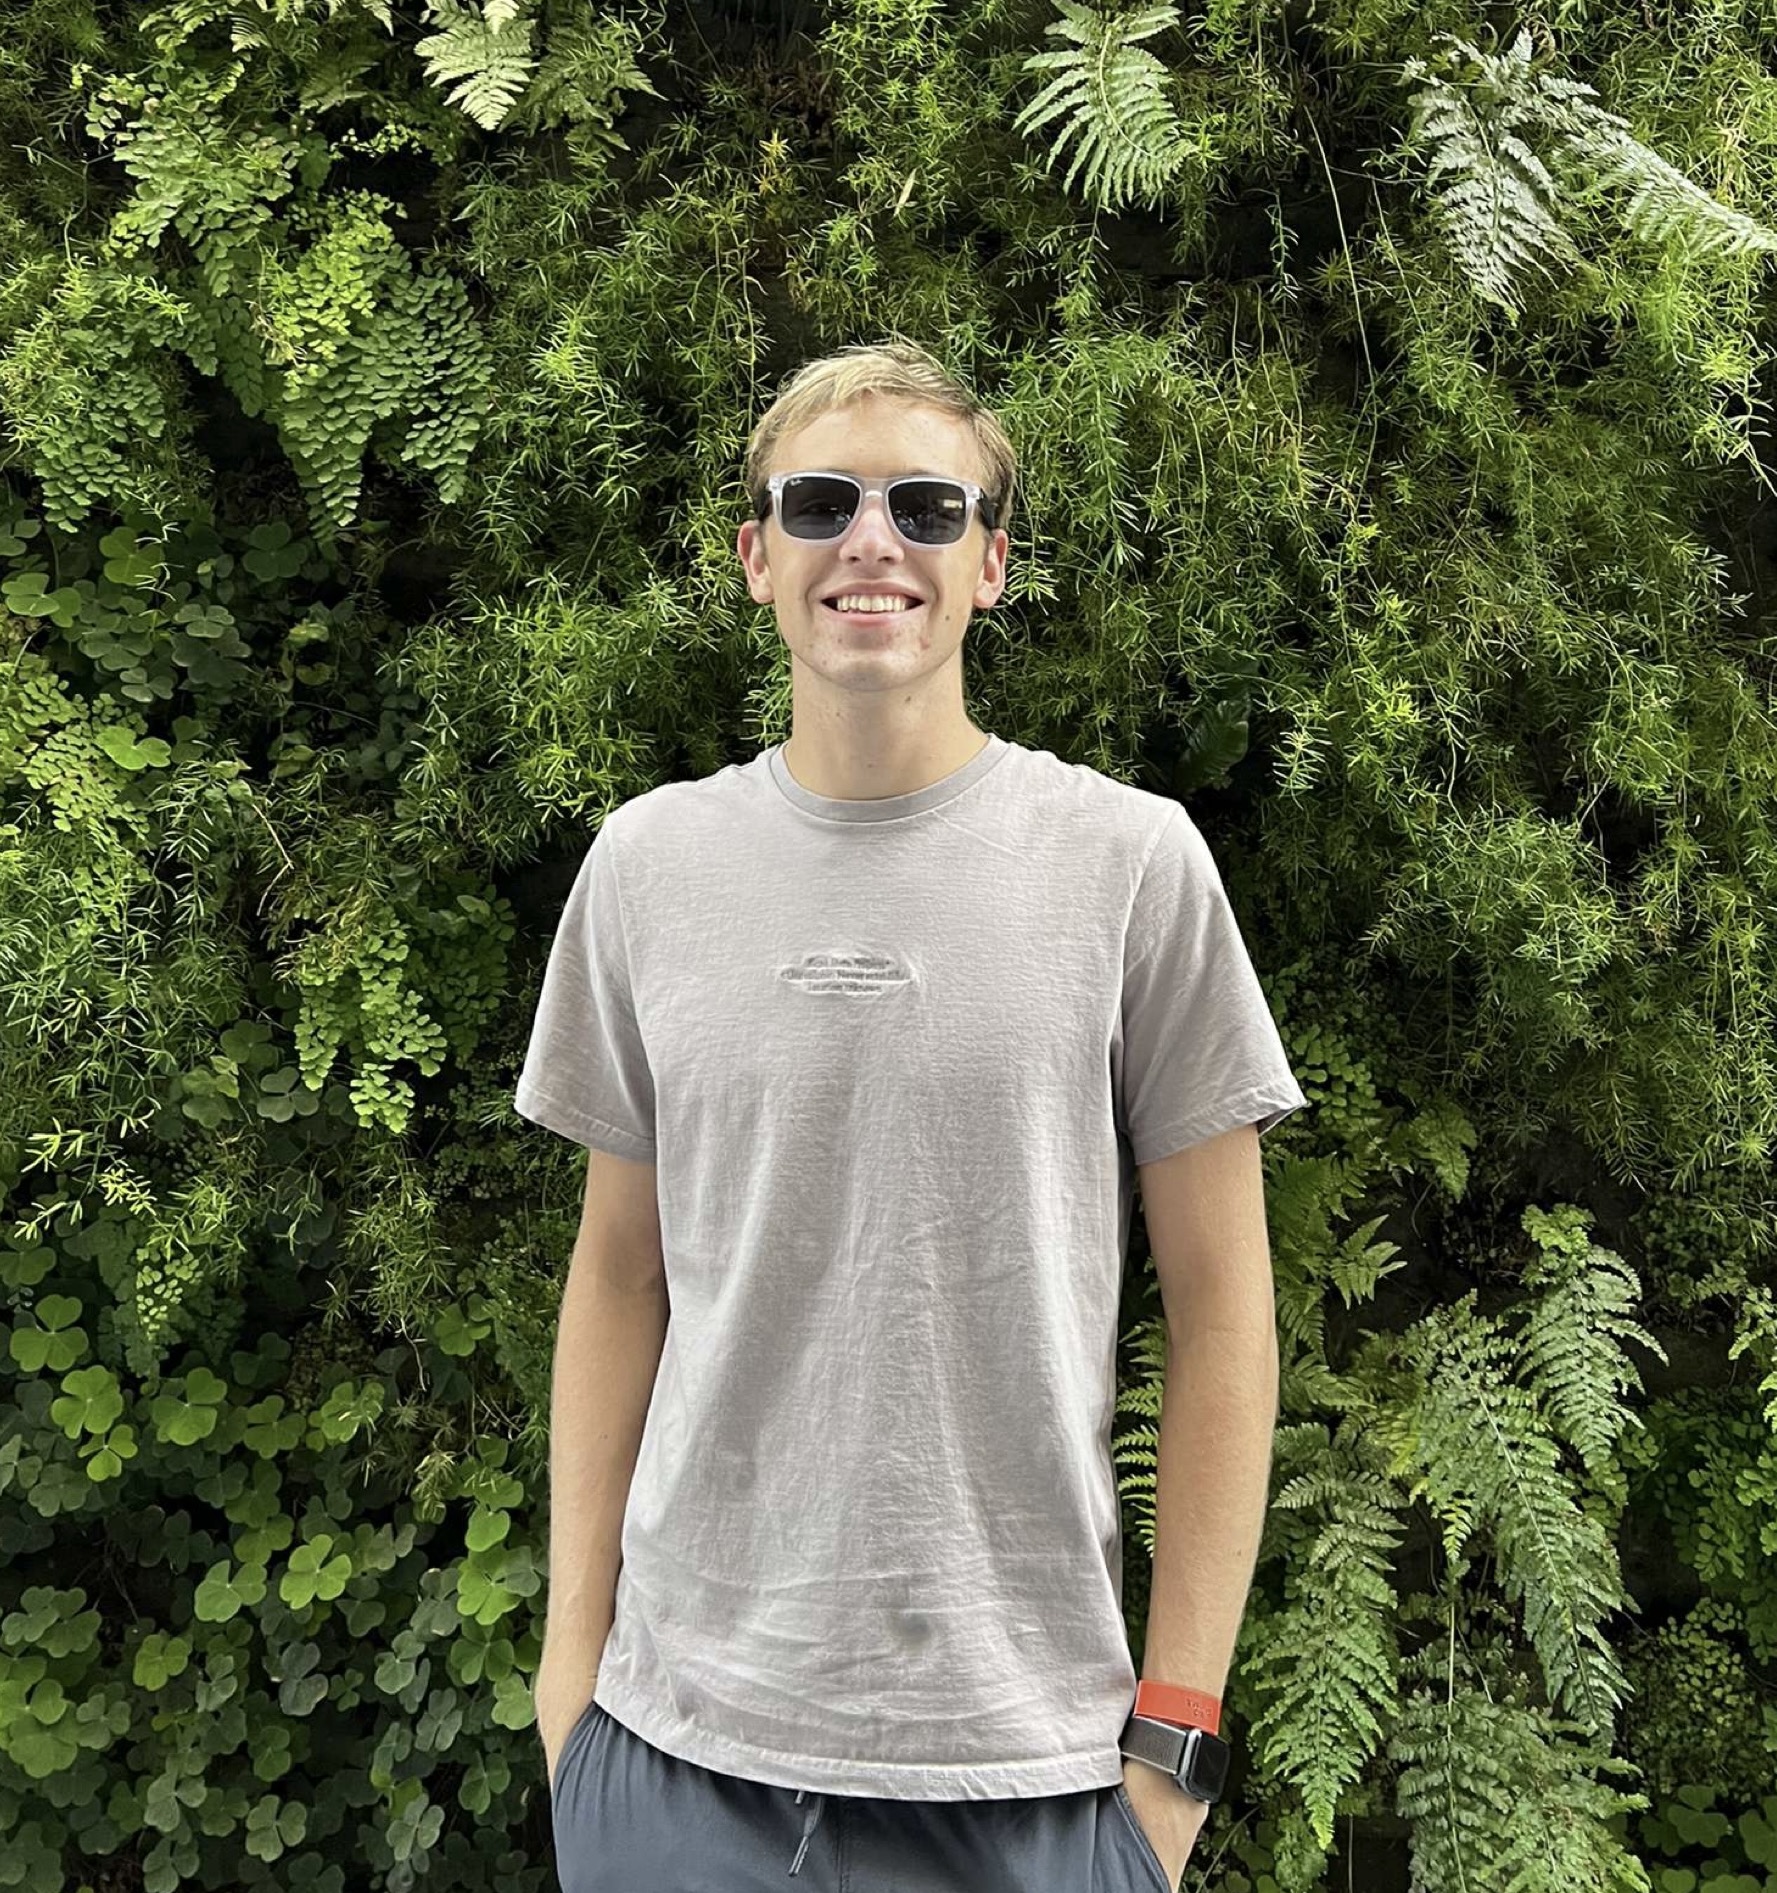 Picture of matthew against a green background